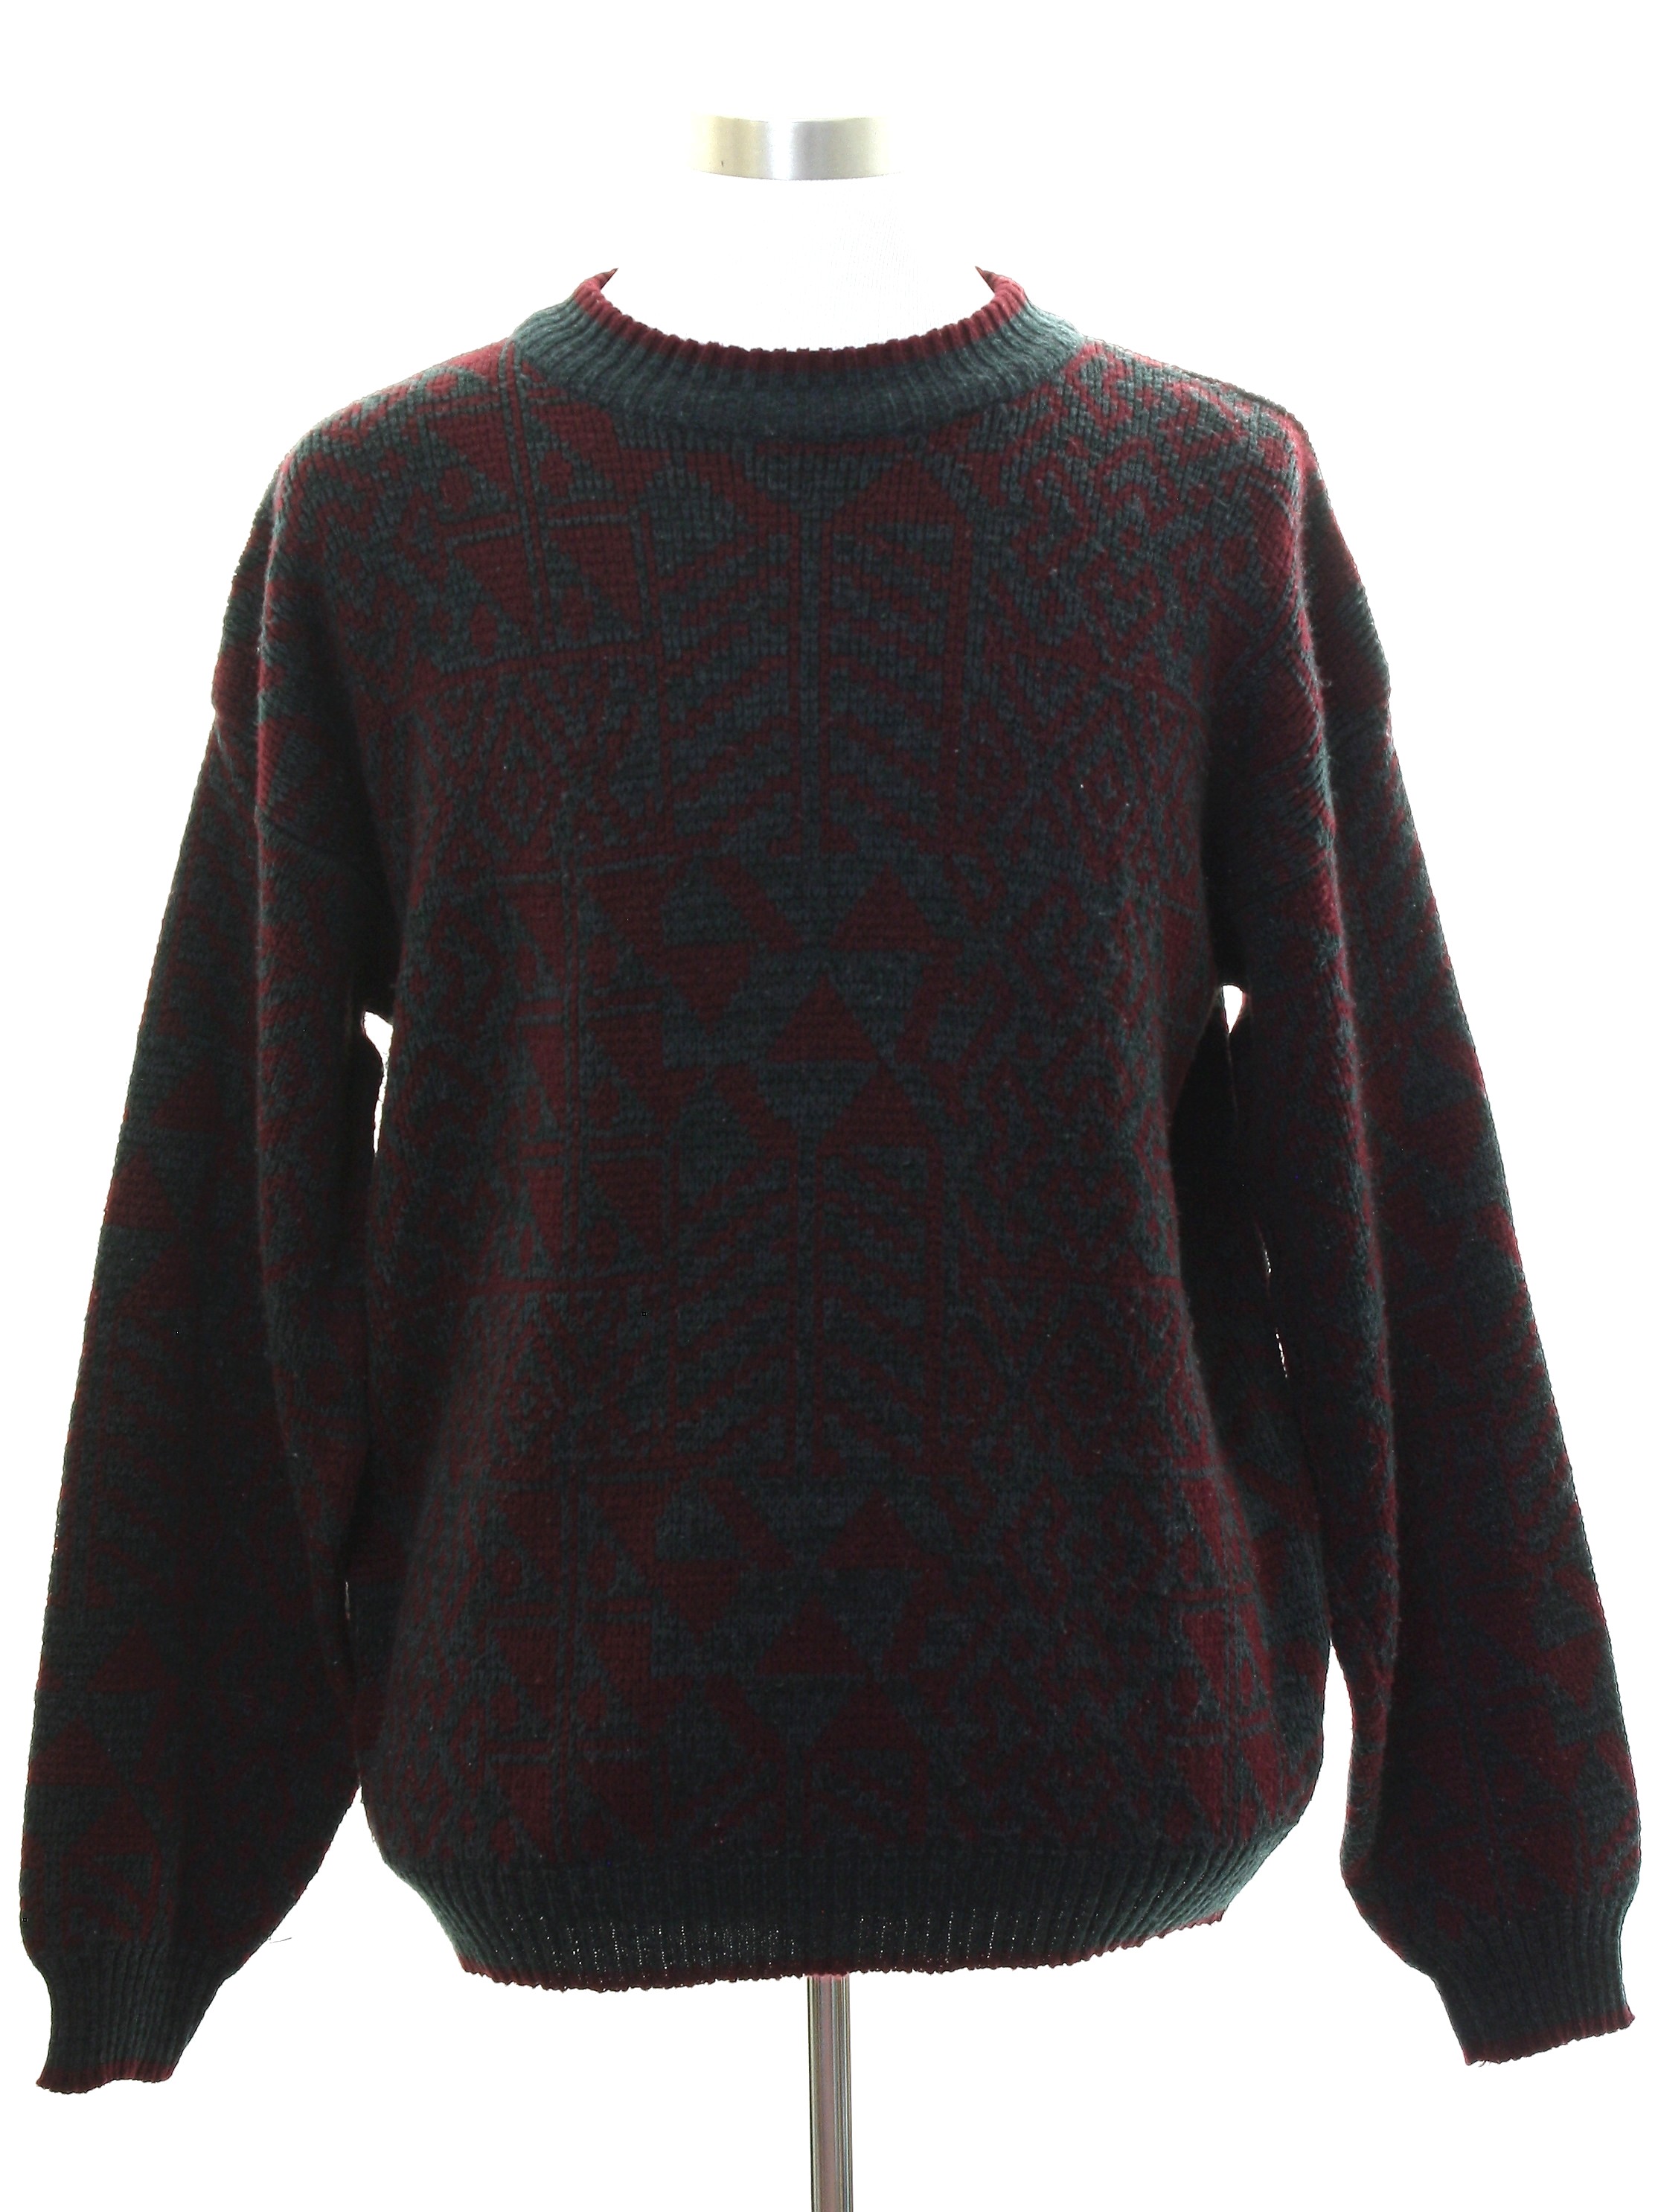 Eighties Vintage Sweater: 80s -The Mens Store at Sears- Mens maroon and ...